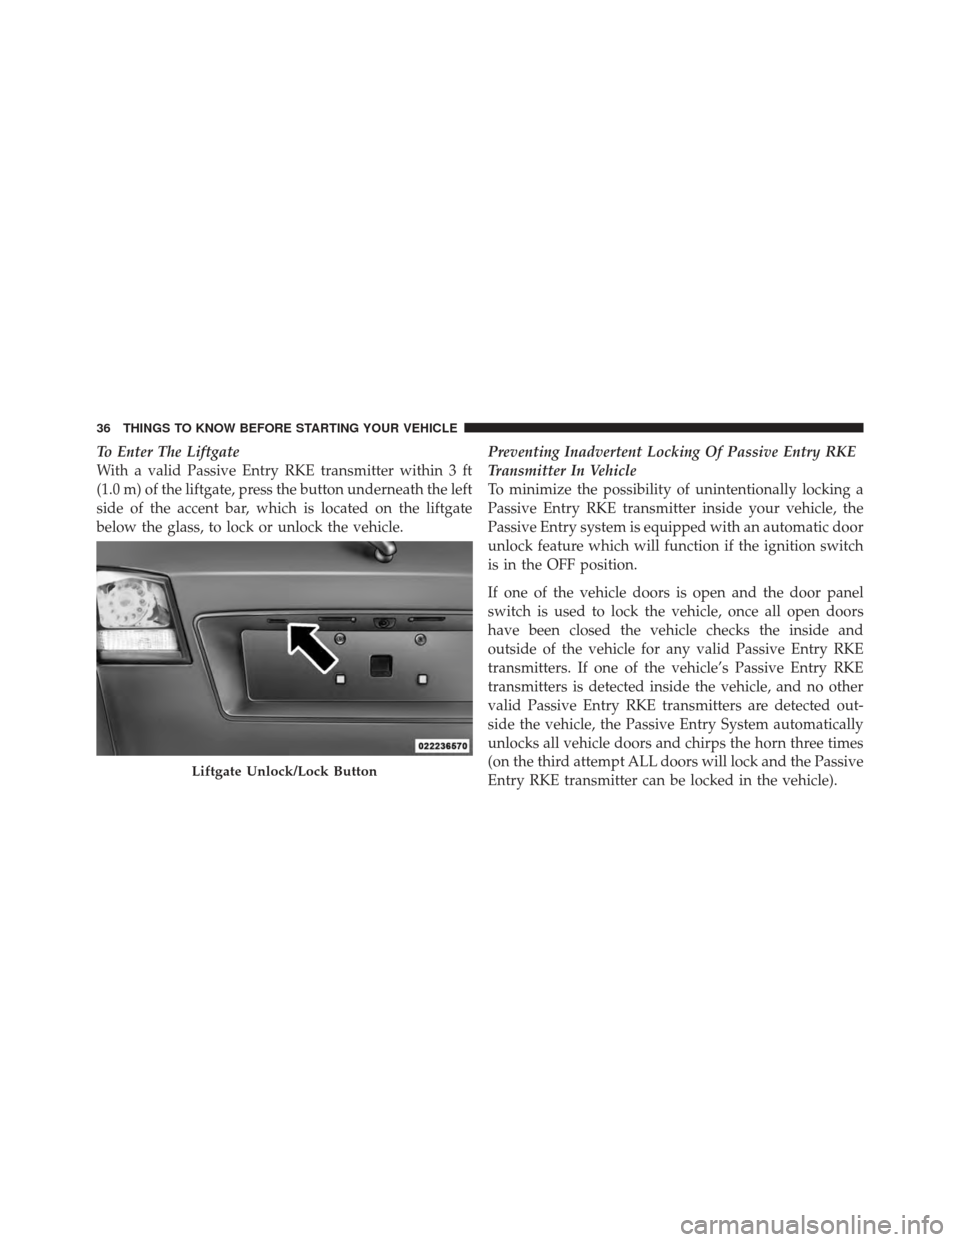 DODGE JOURNEY 2011 1.G Owners Guide To Enter The Liftgate
With a valid Passive Entry RKE transmitter within 3 ft
(1.0 m) of the liftgate, press the button underneath the left
side of the accent bar, which is located on the liftgate
belo